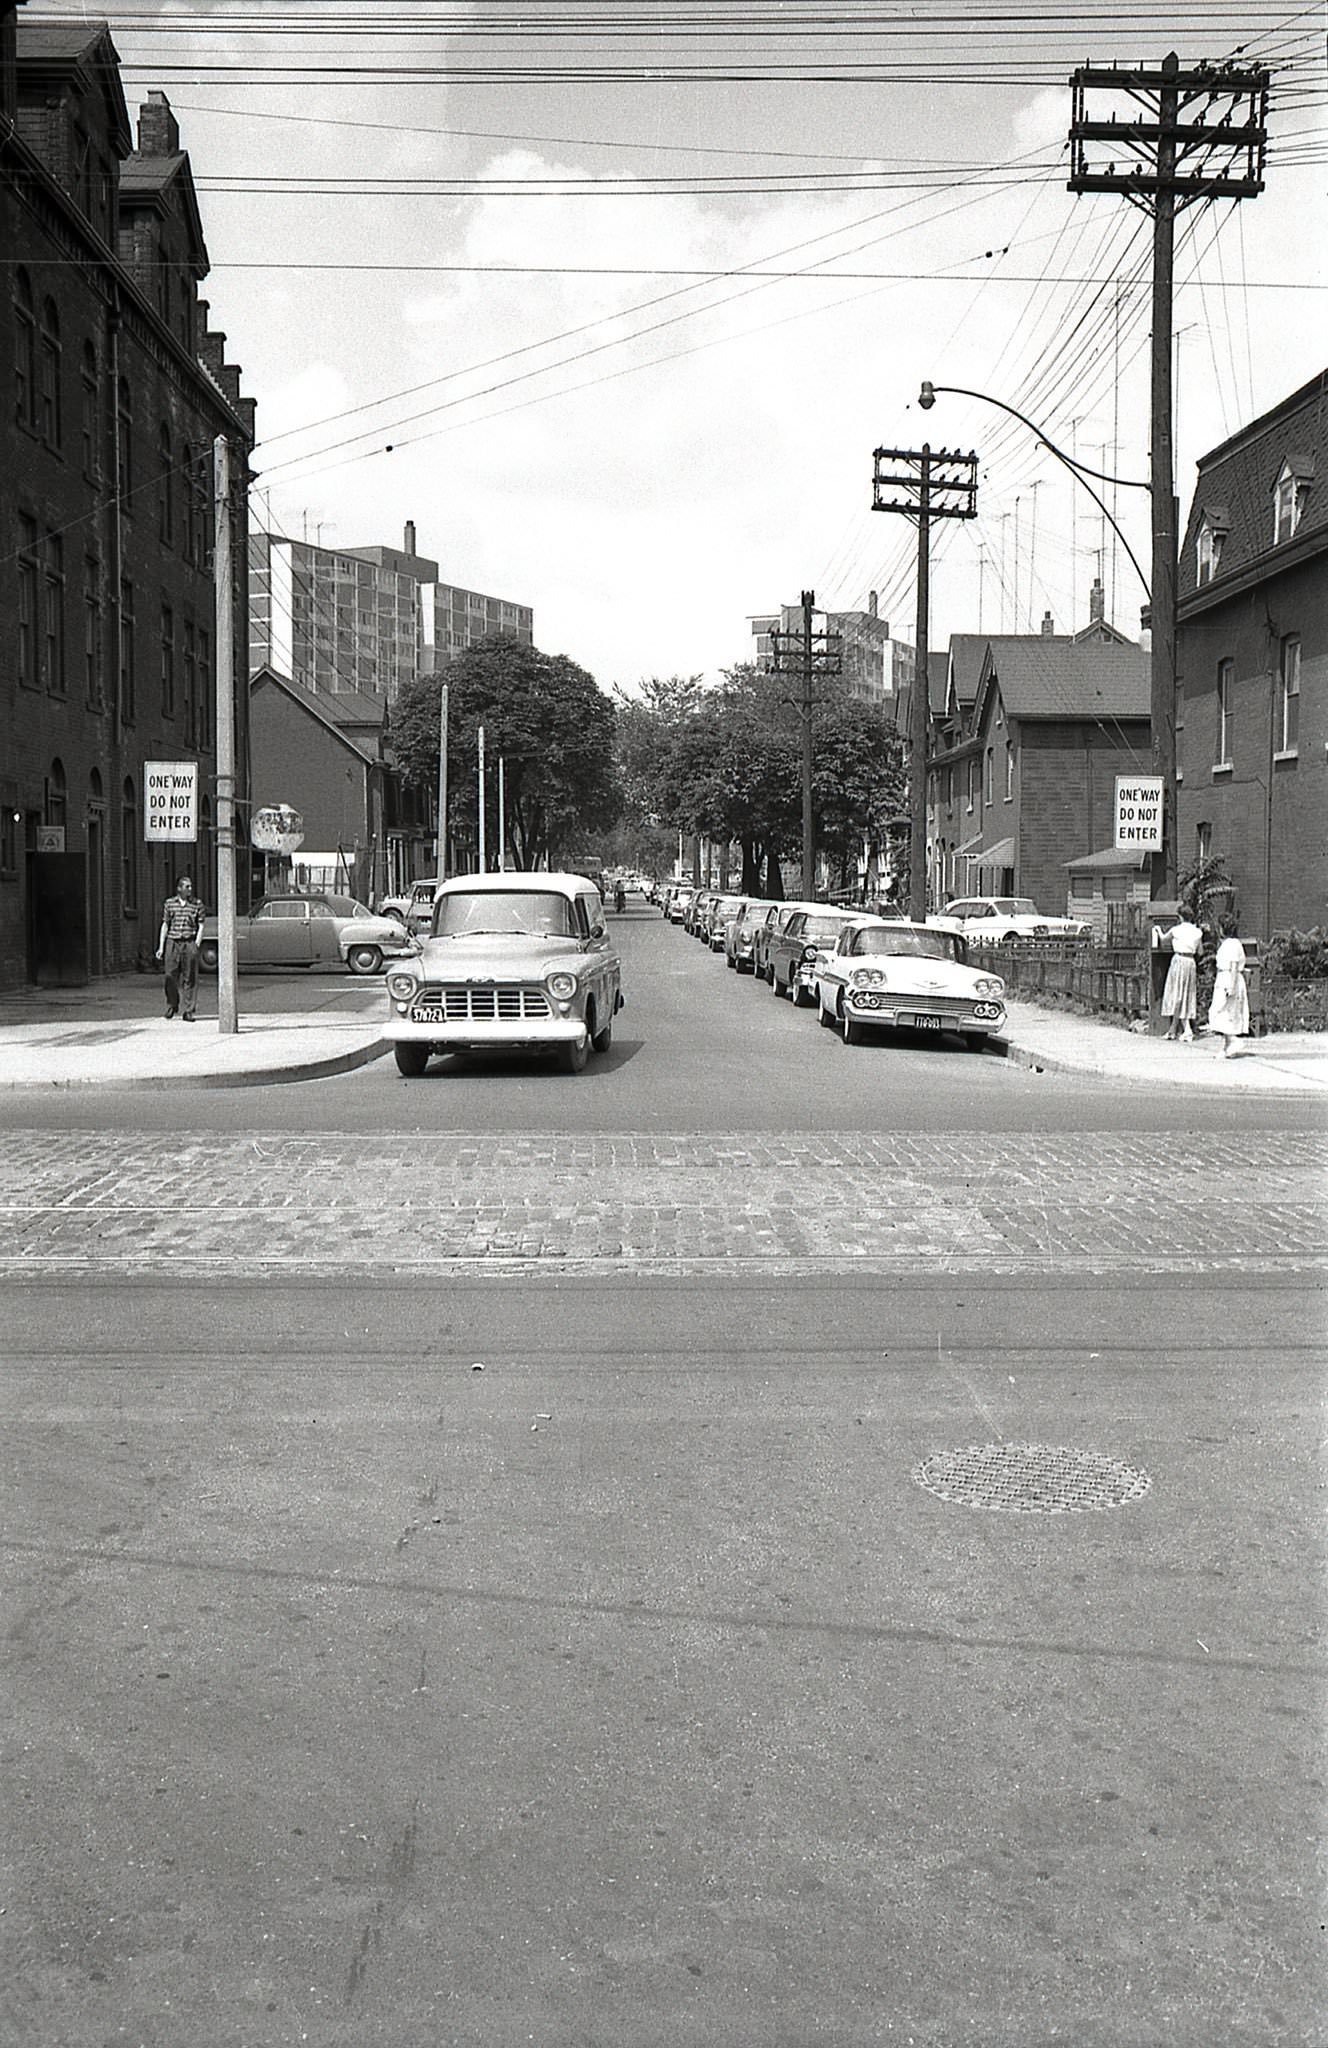 Looking north along Sumach Street from Queen, 1960s. In the distance, two of Peter Dickinson’s Maisonette Towers are visible.